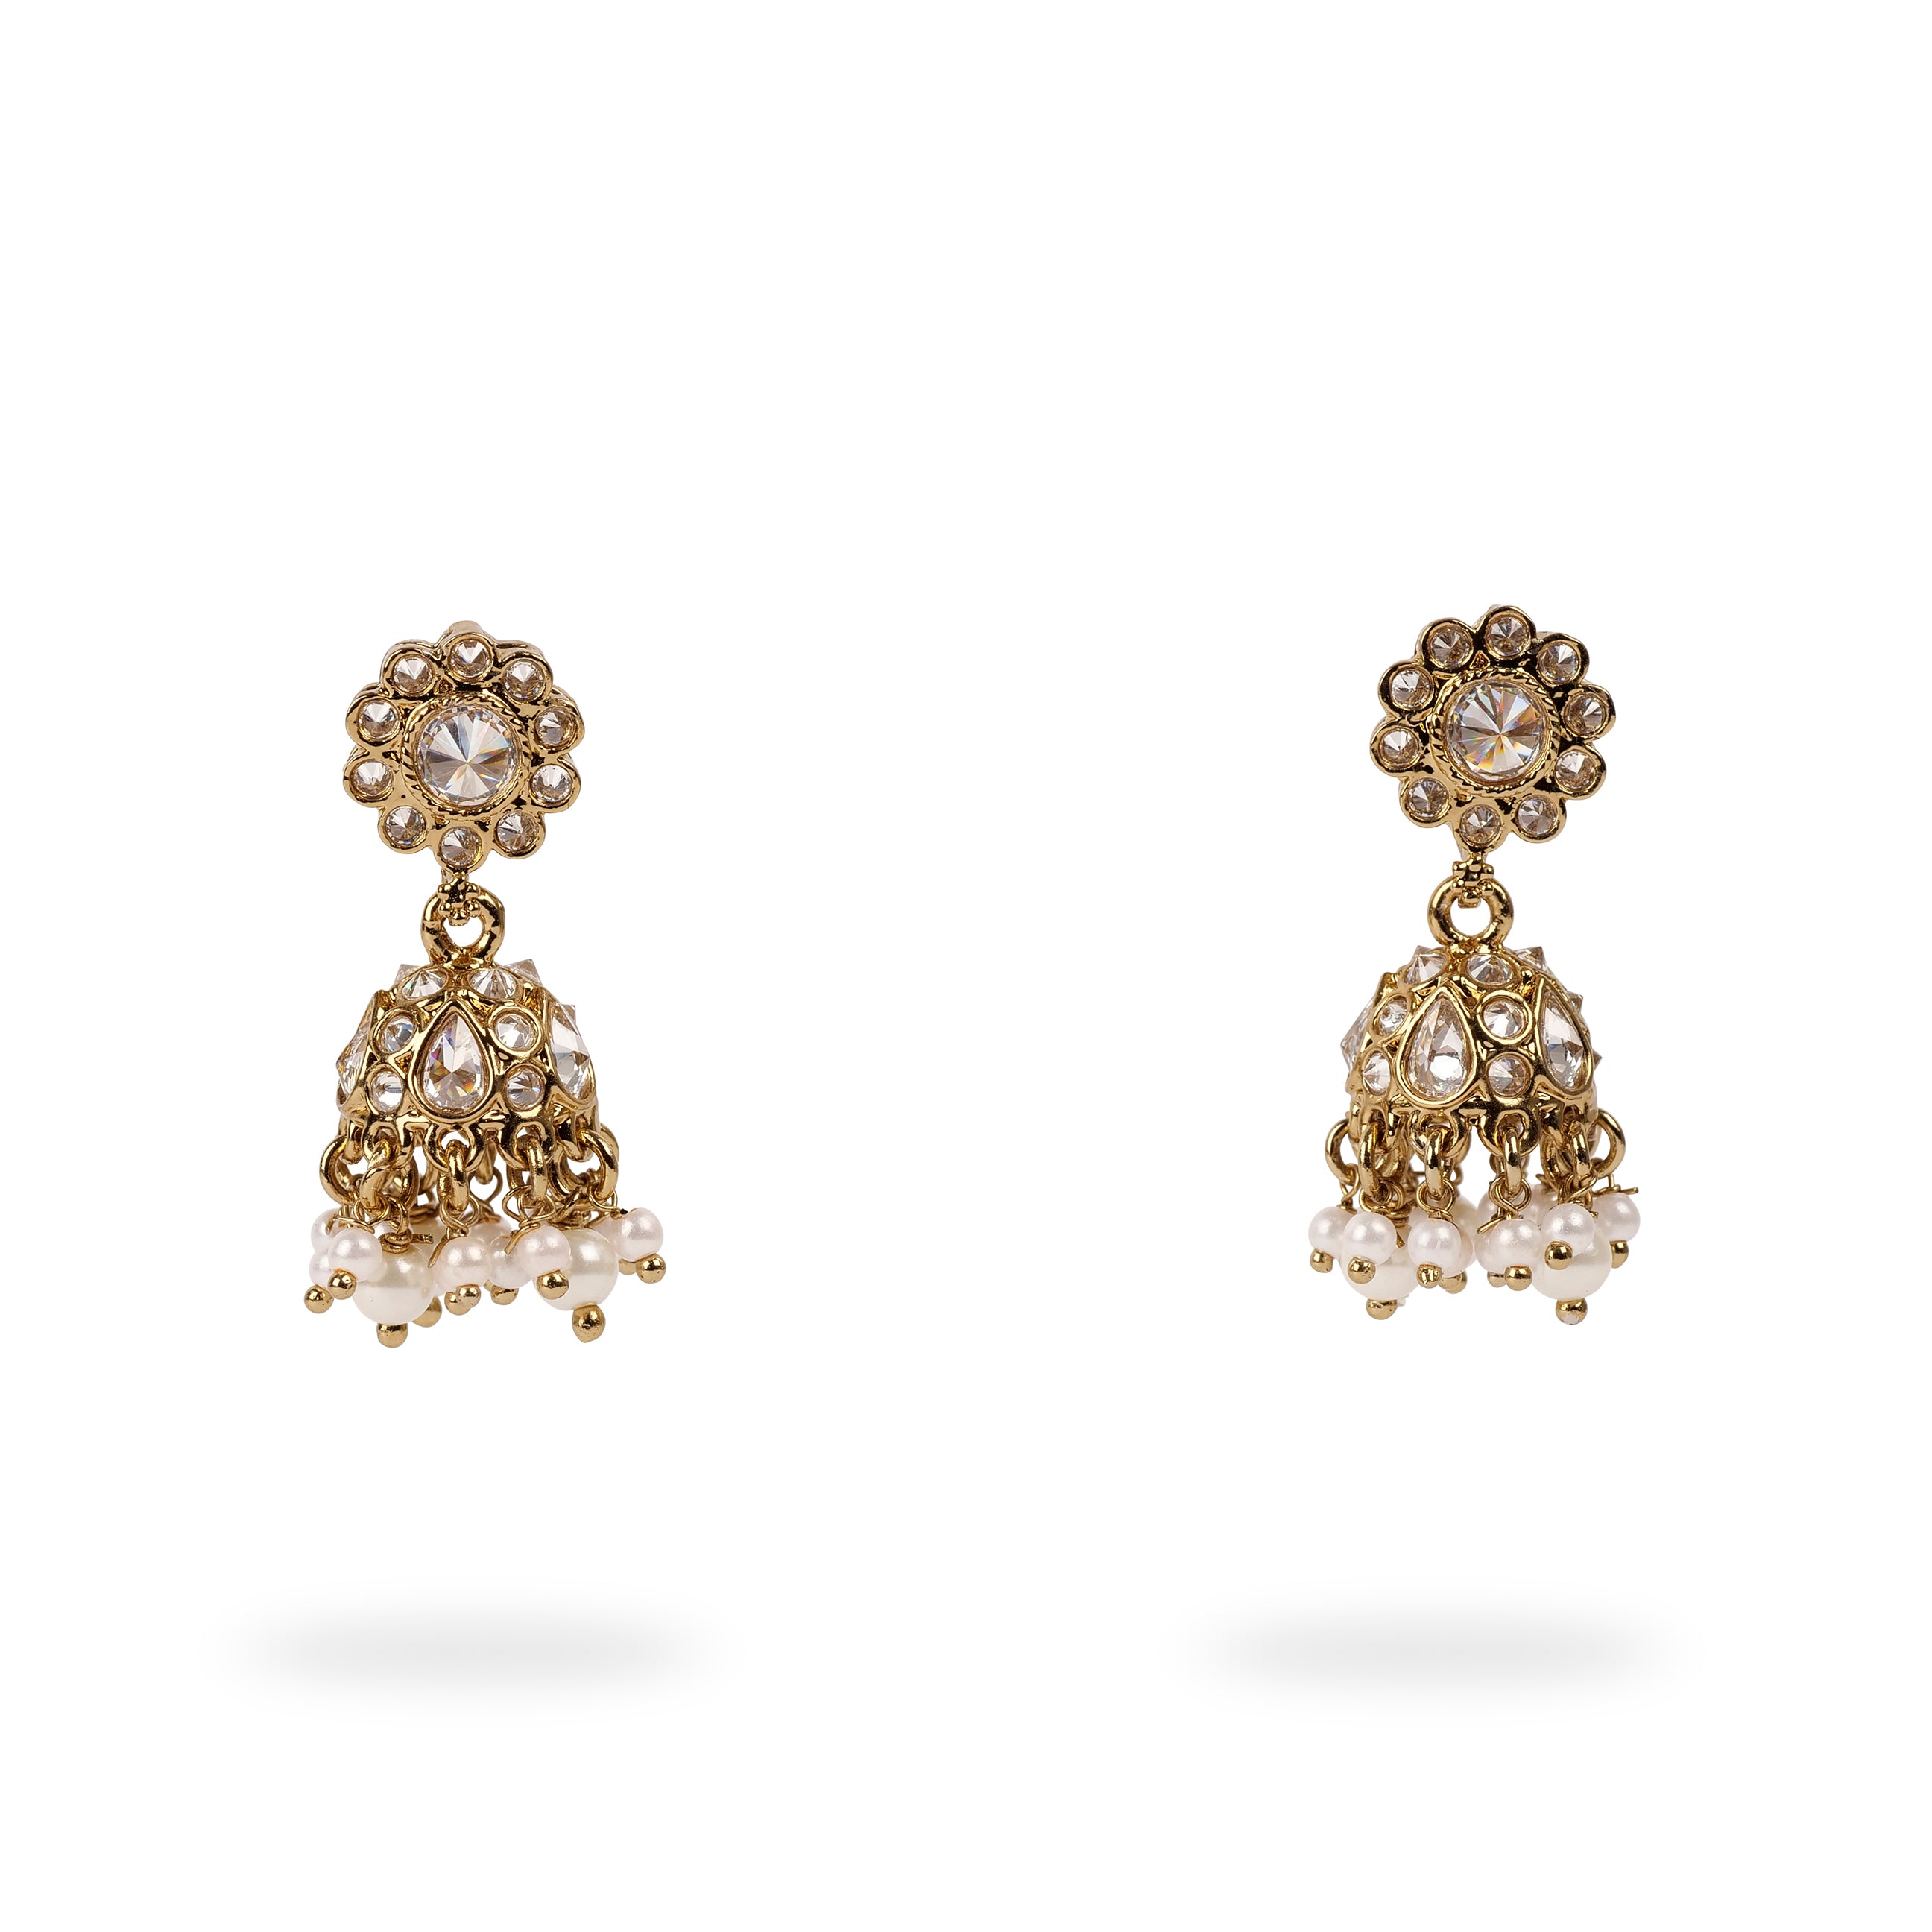 Small Daisy Jhumka Earrings in Antique Gold